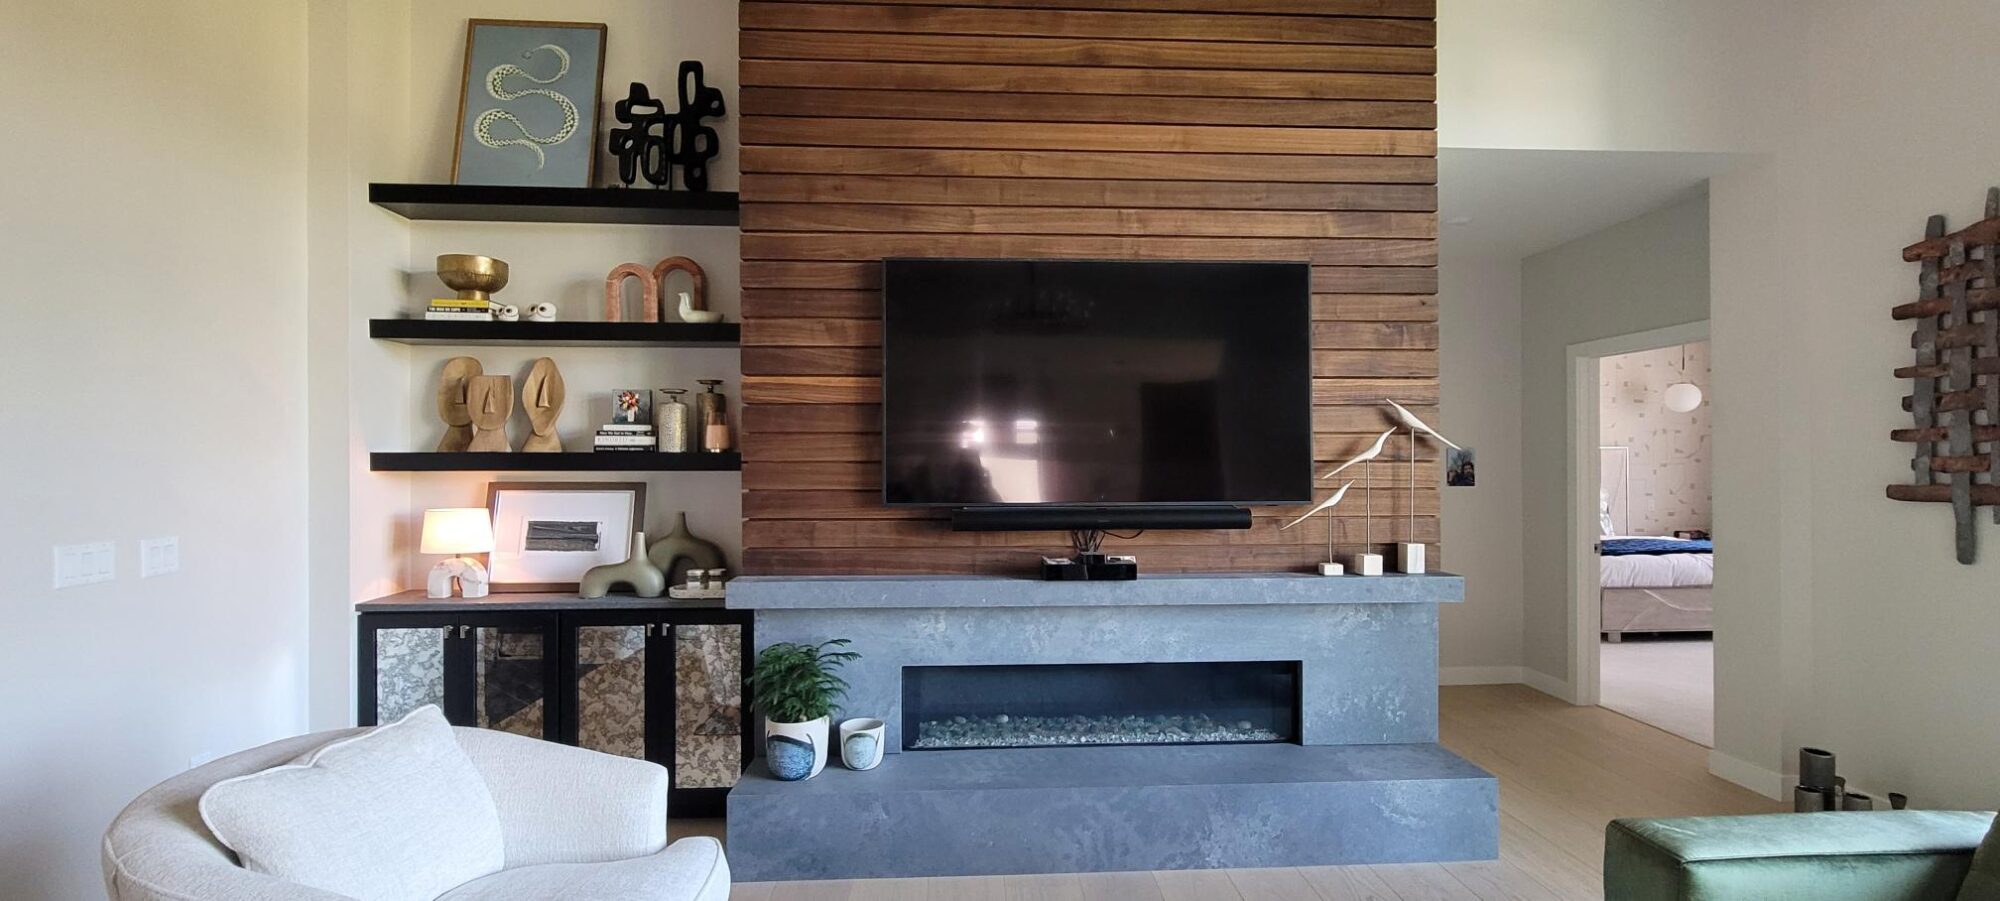 Vibrant Mid-Century Living Space Accent Wall and Fireplace